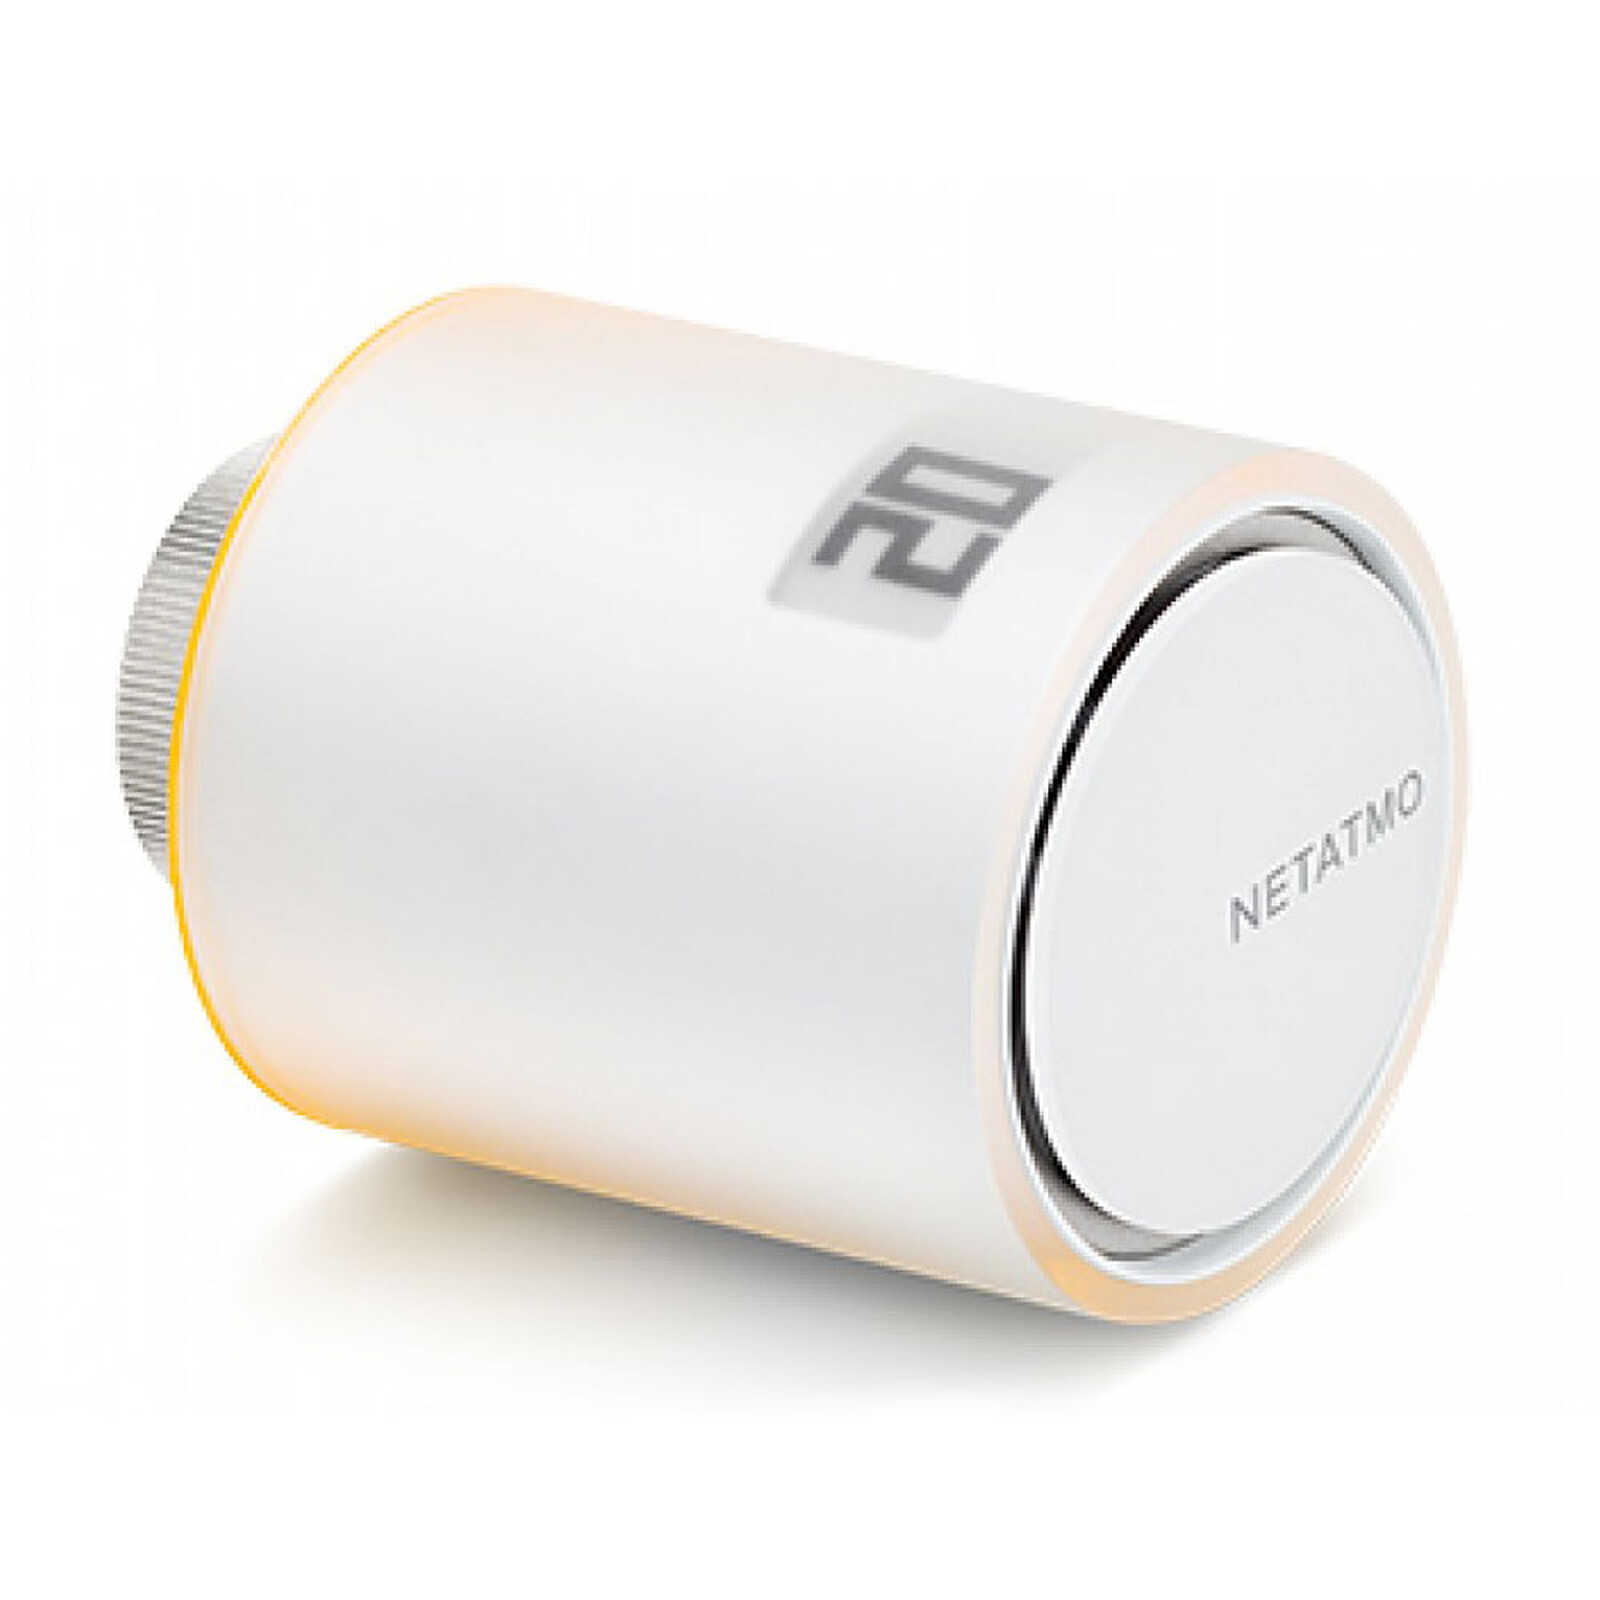 Netatmo Additional Connected Valve - Smart thermostat - LDLC 3